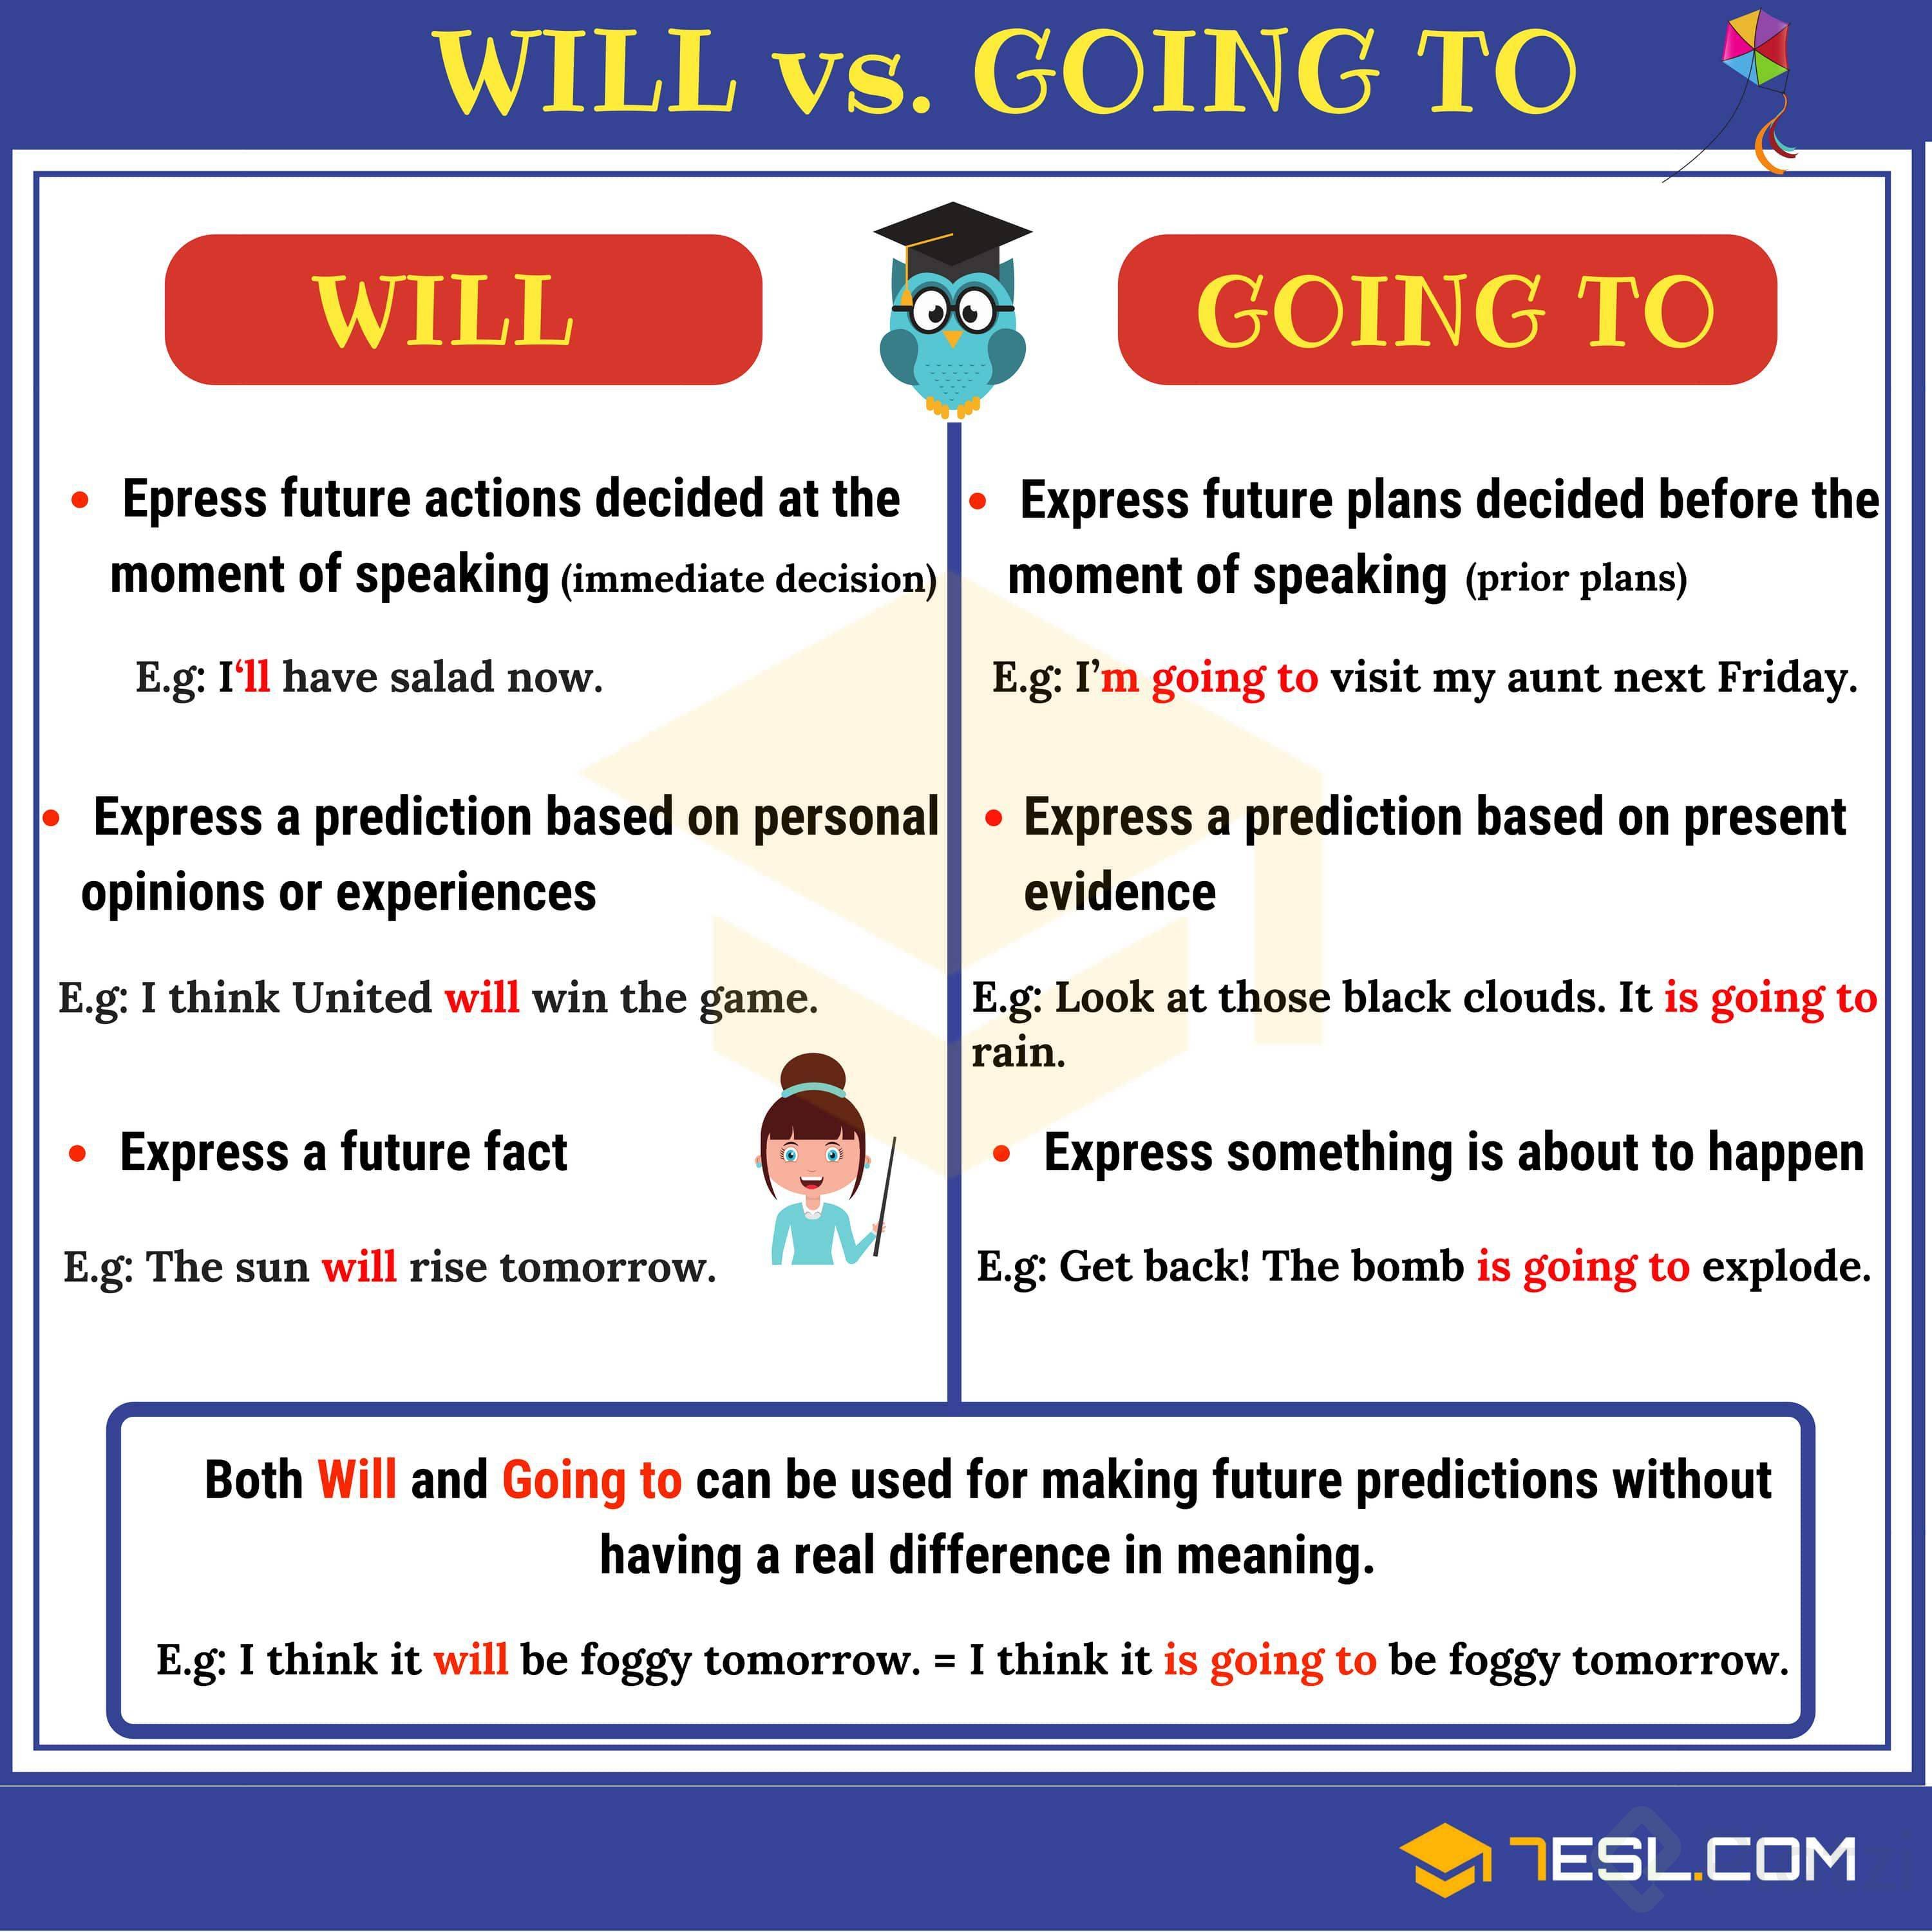 Will vs going to.png